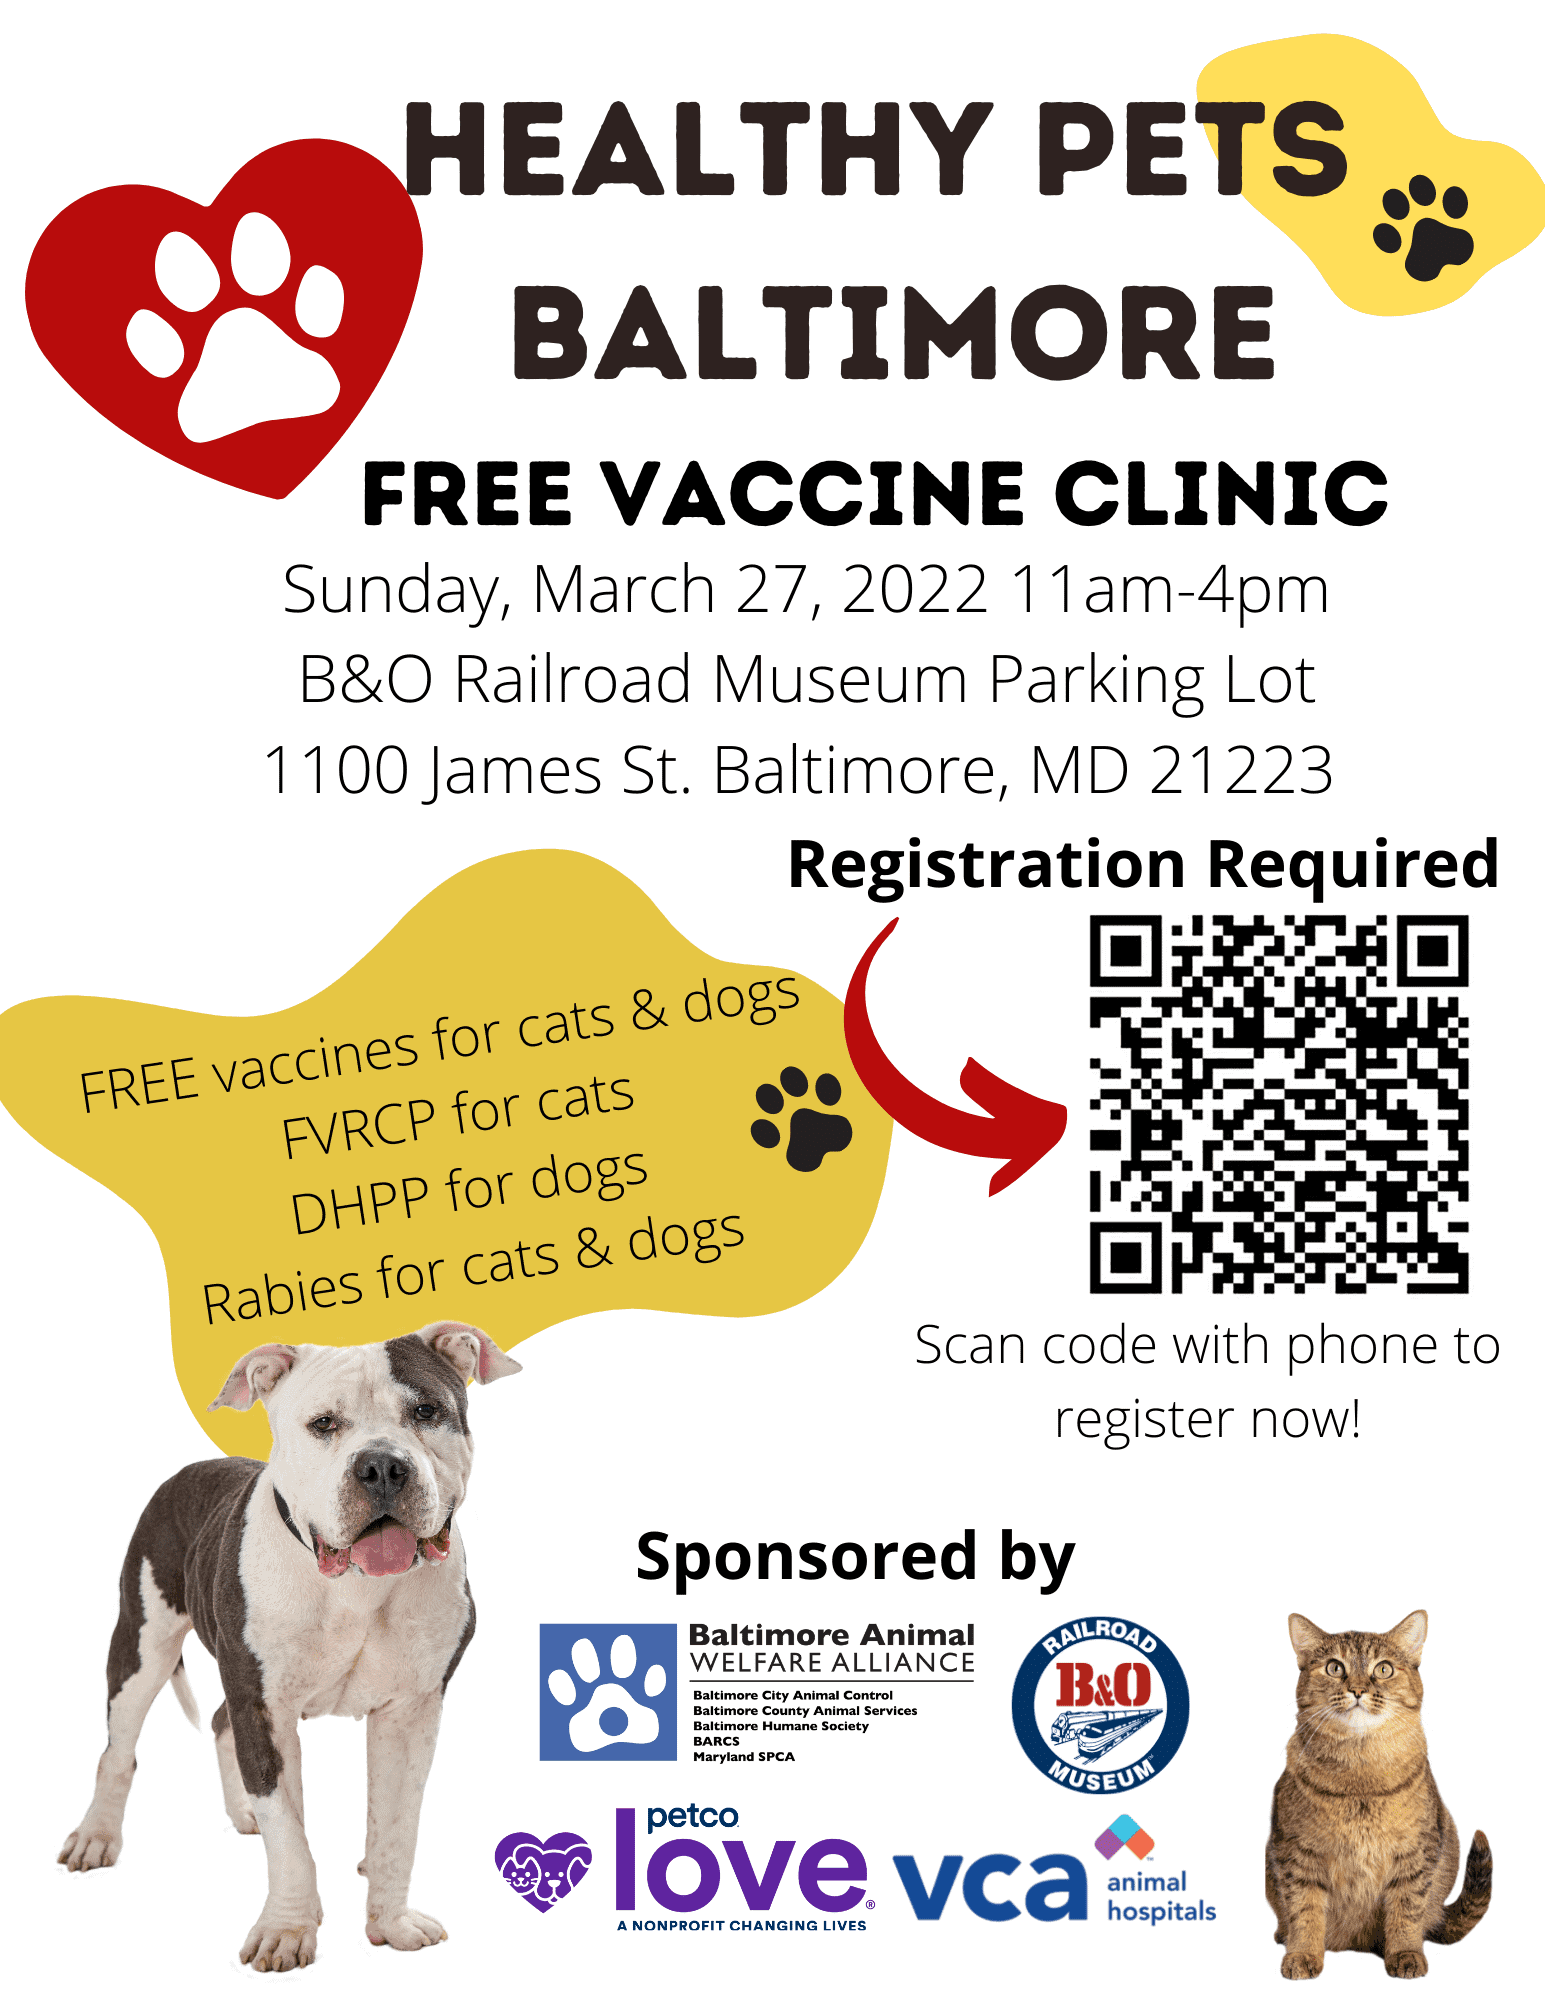 Healthy Pets Baltimore Free Vaccine Clinic – Baltimore Humane Society